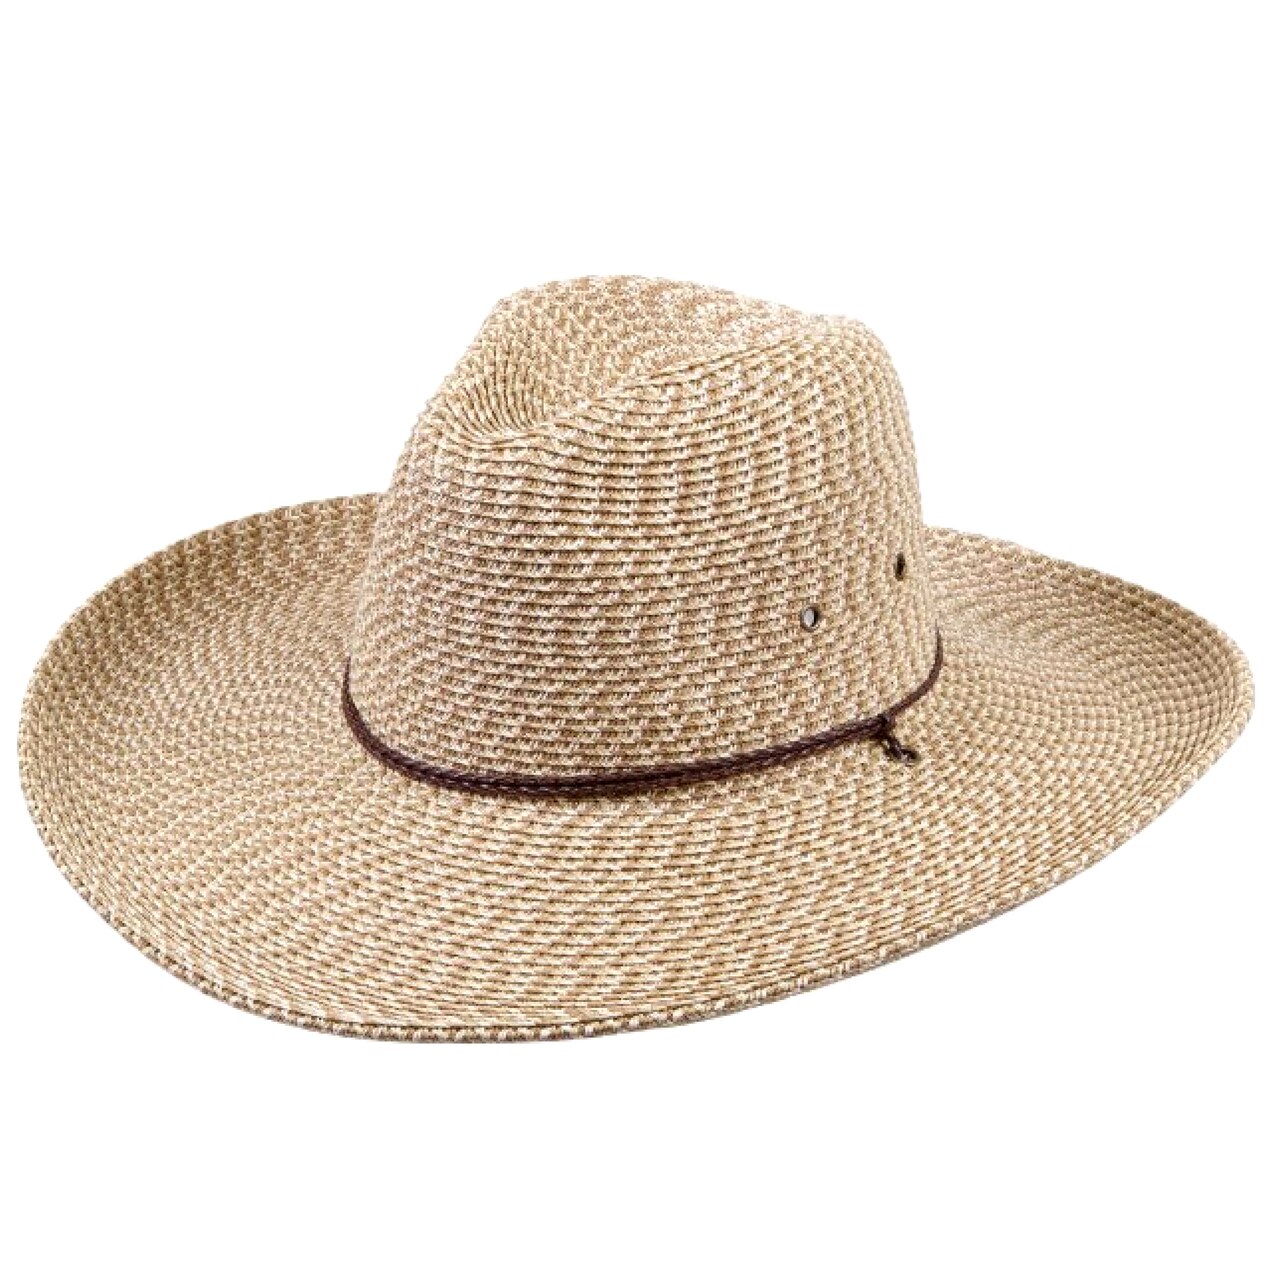 Summer Shade - wide Brimmed - Adjustable for Perfect Fit - RMOHATS